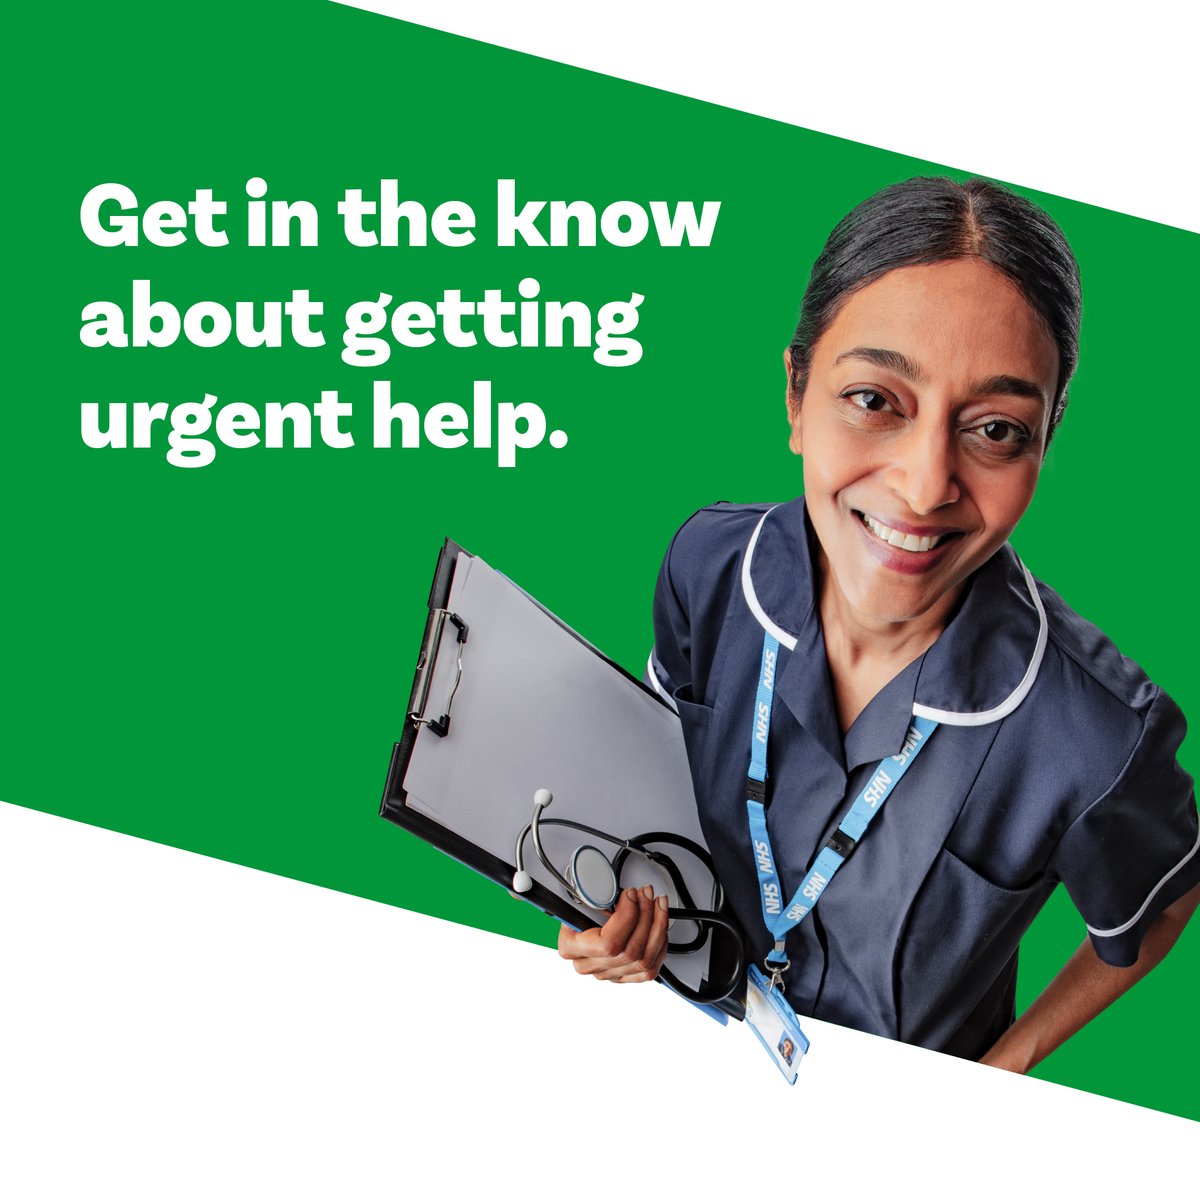 Need urgent healthcare? There are eight urgent care services you can go to, in Leicester, Leicestershire and Rutland, and you don’t need an appointment. Please contact NHS 111 first, to be directed to the right place for you. bit.ly/LLRUrgentCare #GetInTheKnow